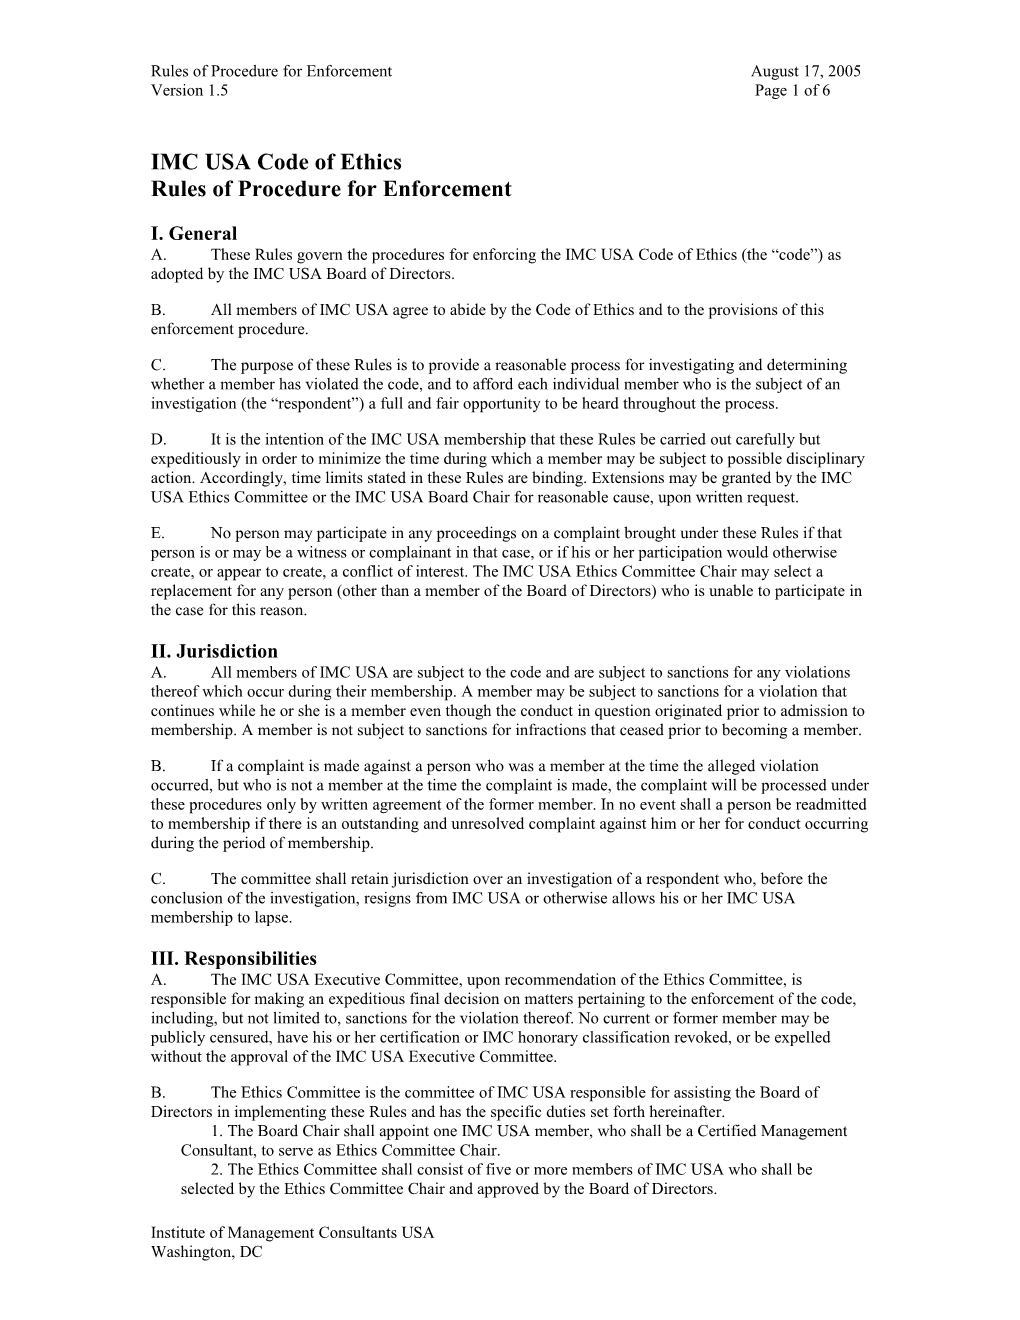 IMC USA Rules of Procedure for Ethics Code Enforcement